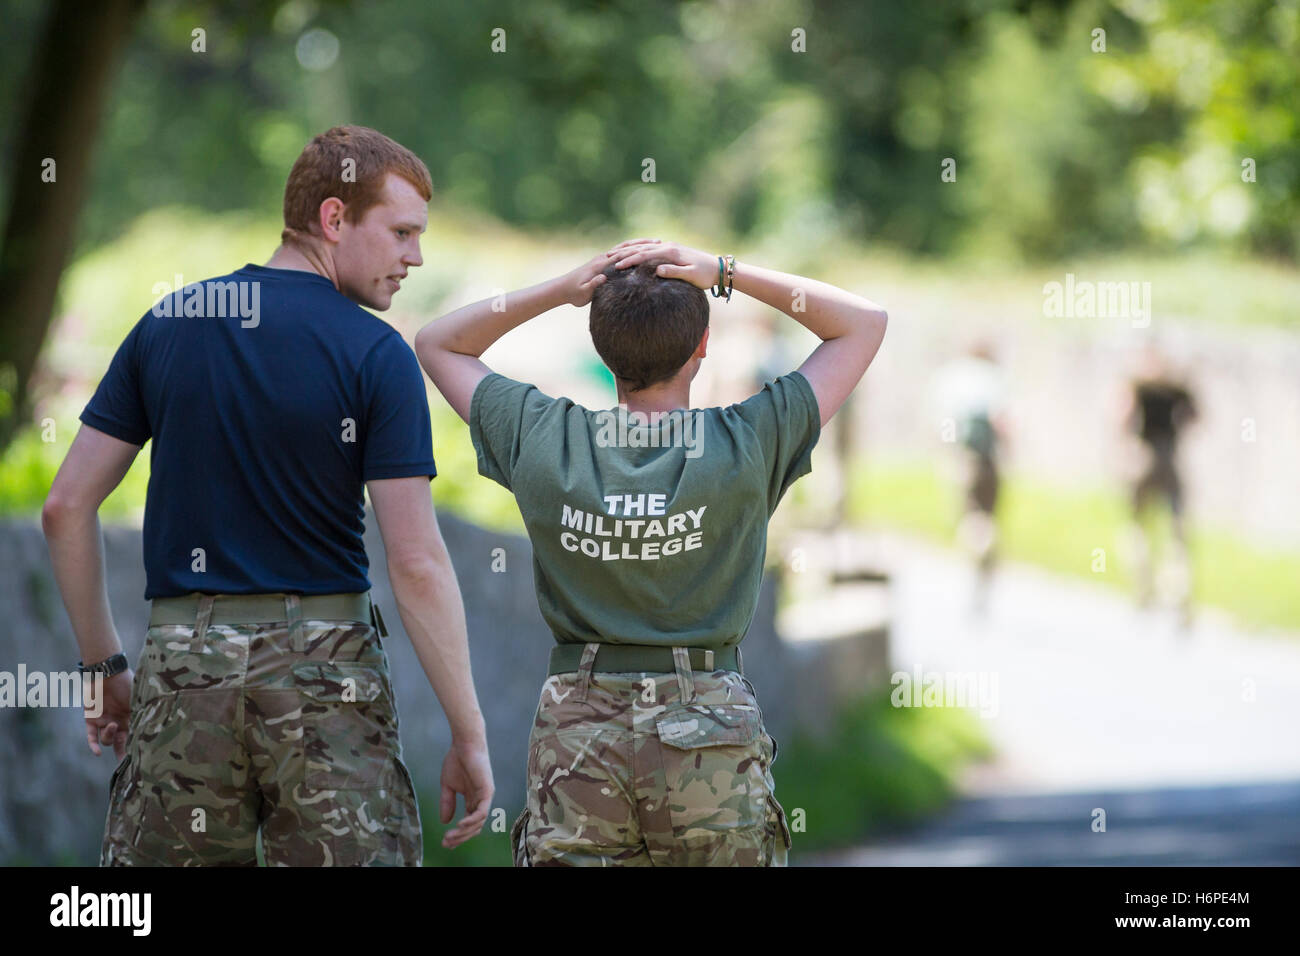 young people showing teamwork and support on military physical training exercise Stock Photo